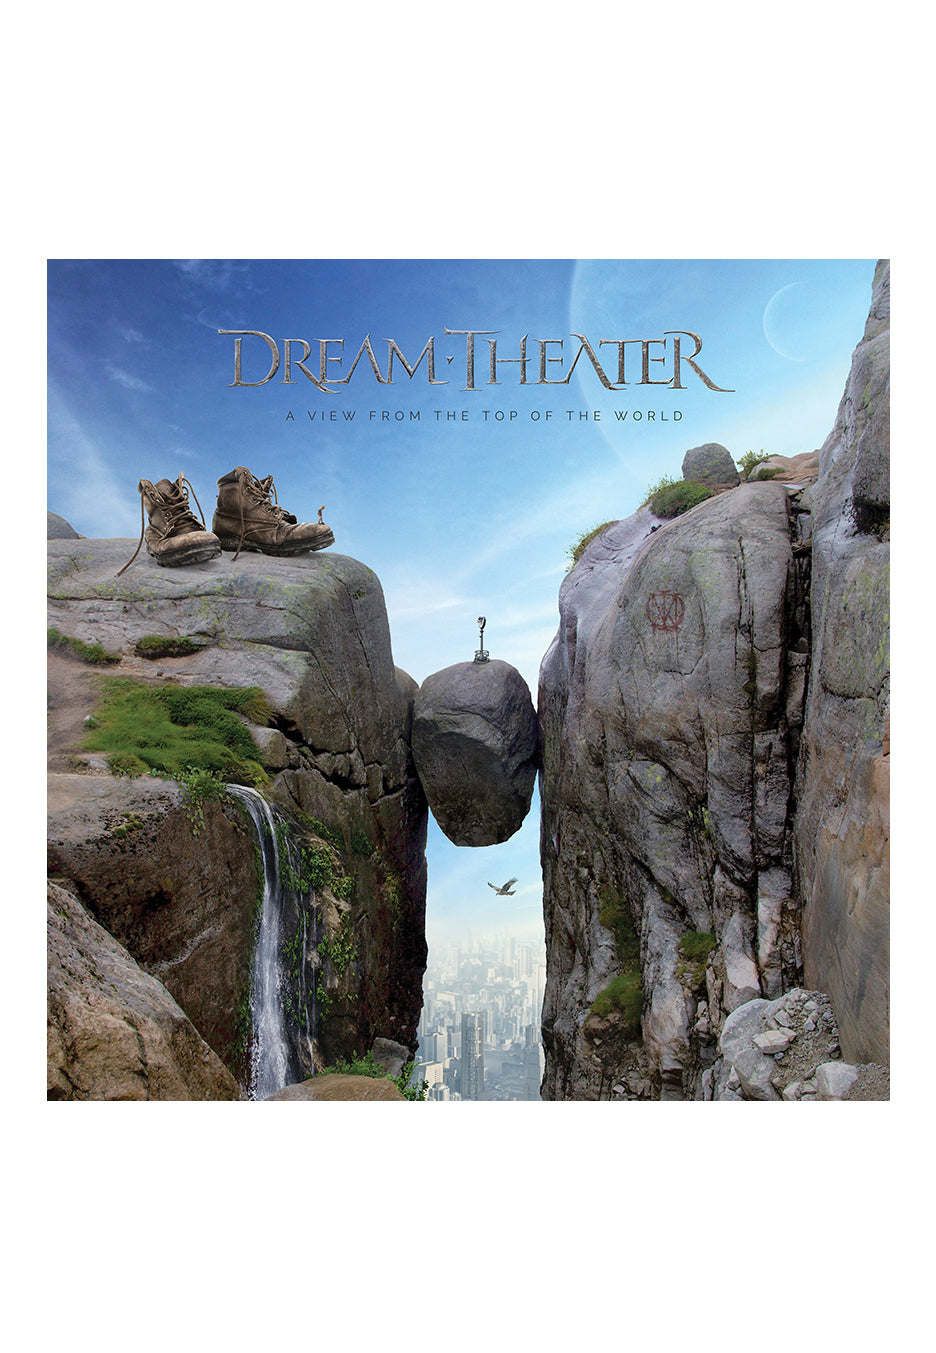 Dream Theater - A View From The Top Of The World Special Edition - Digipak CD